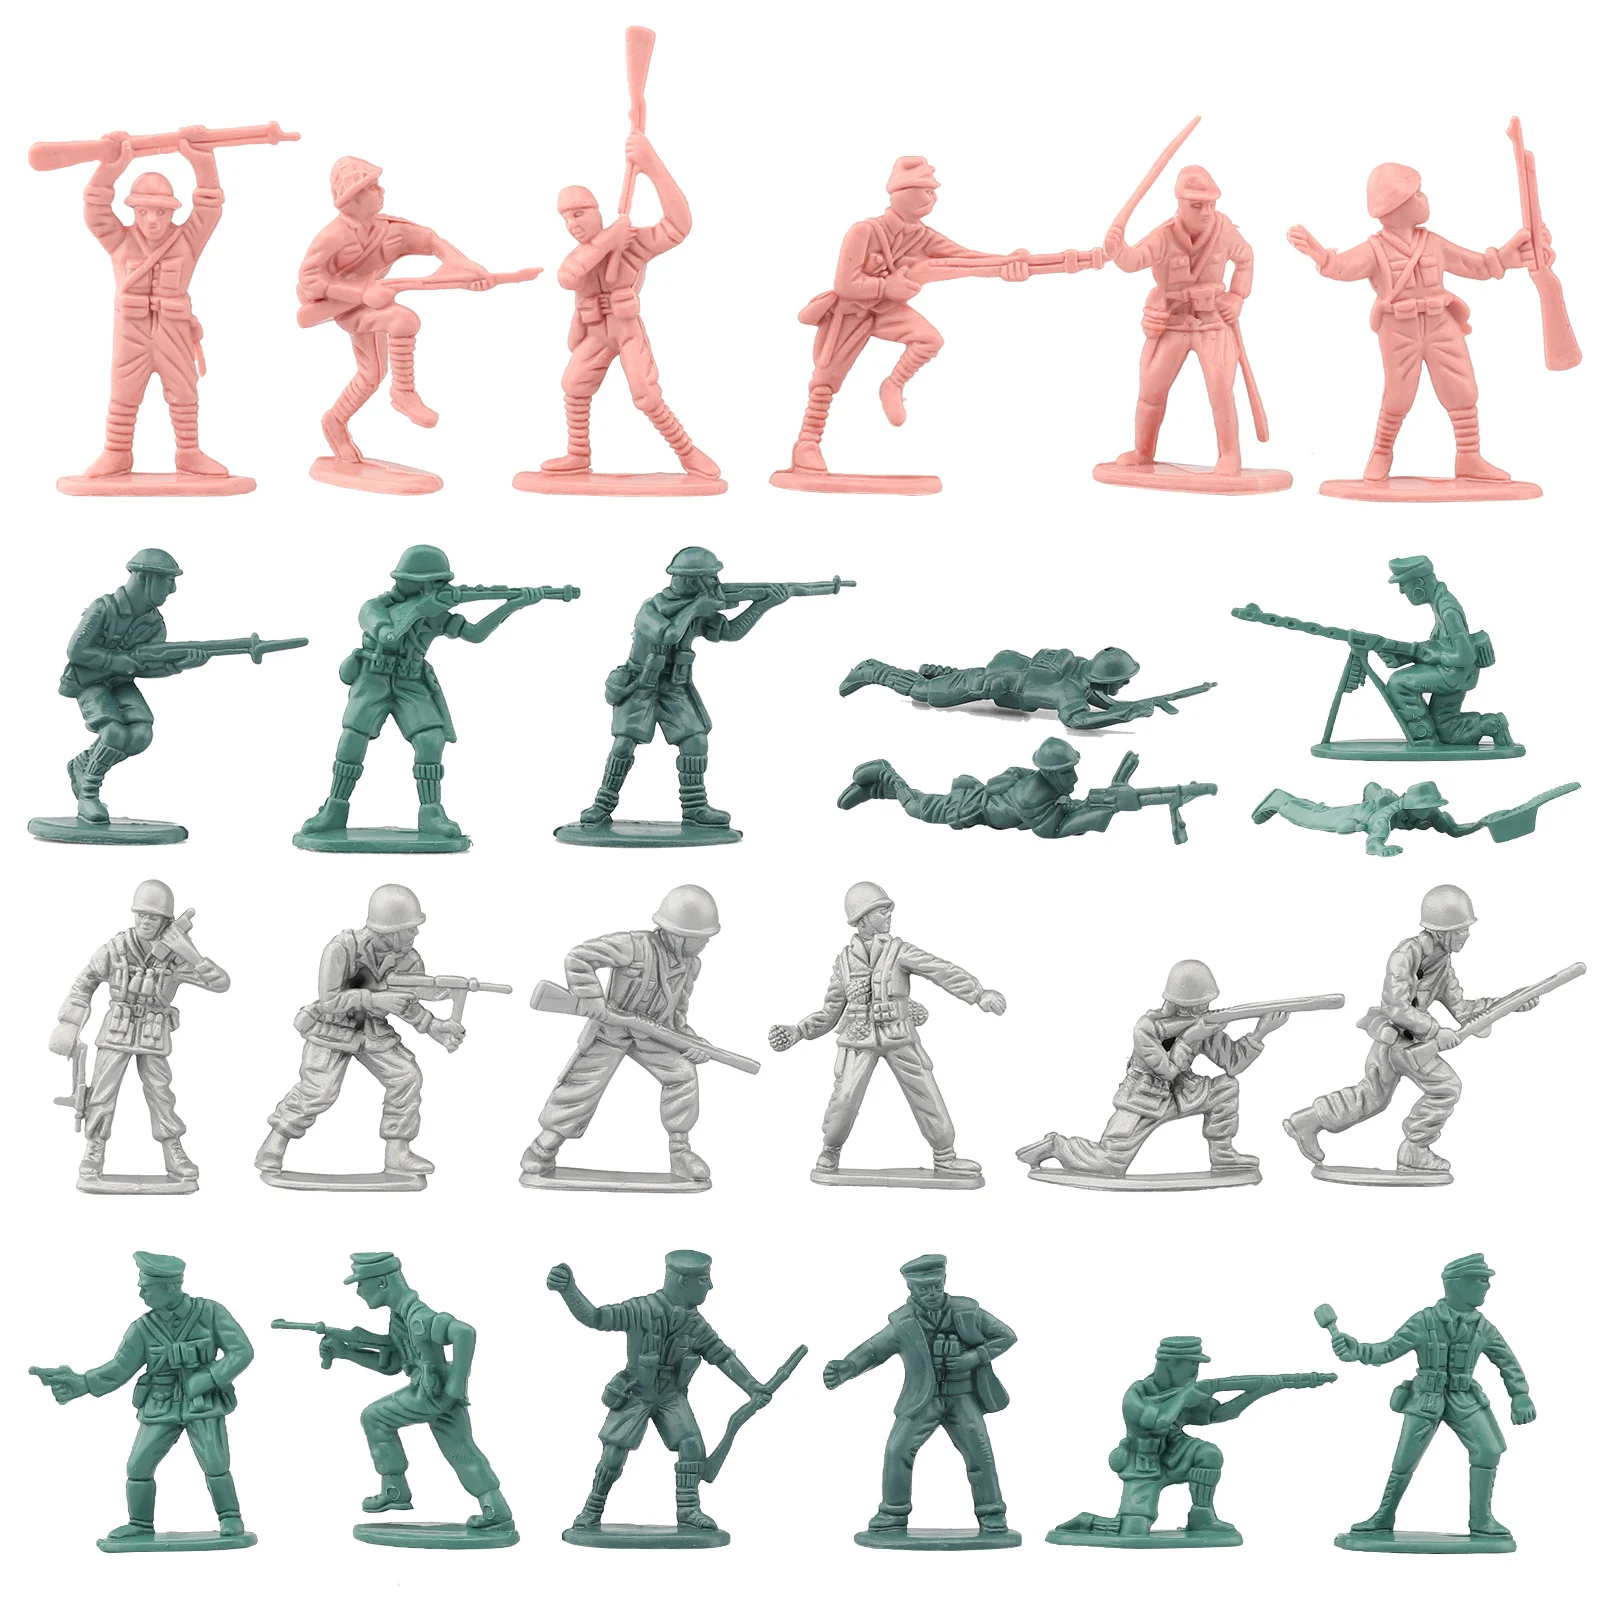 150 pcs Military Plastic Toy Soldiers Army Men 1:72 Figures in 12 Poses 